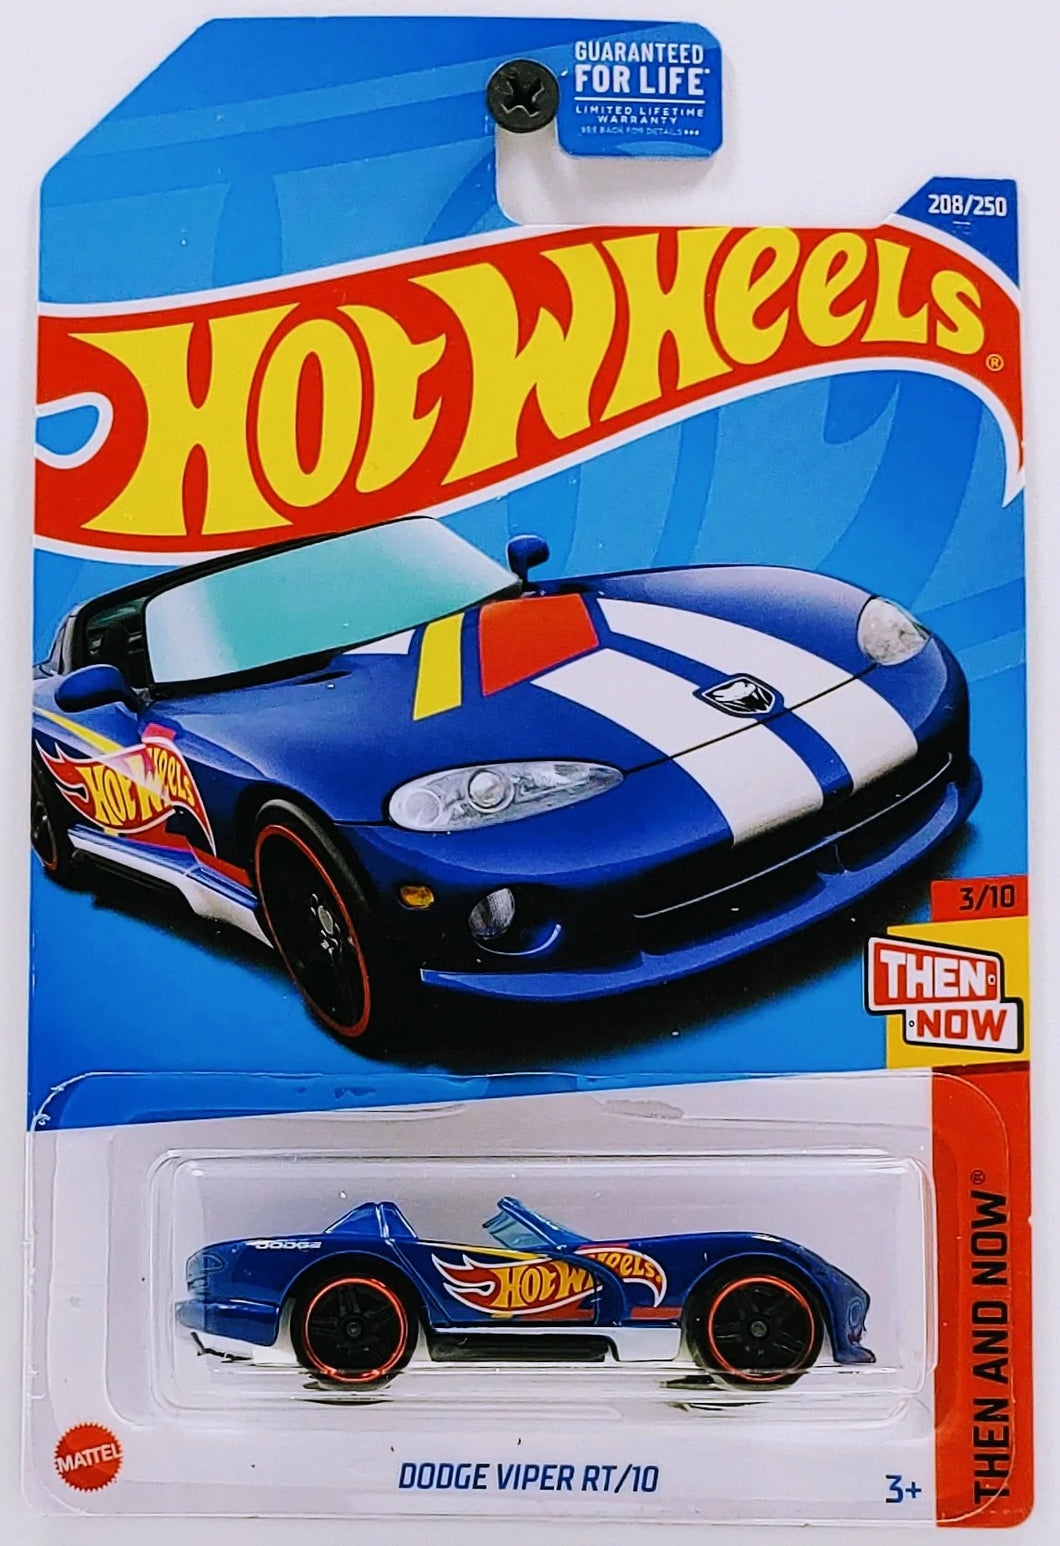 Hot Wheels Dodge Viper RT/10 Then and Now 3/10 208/250